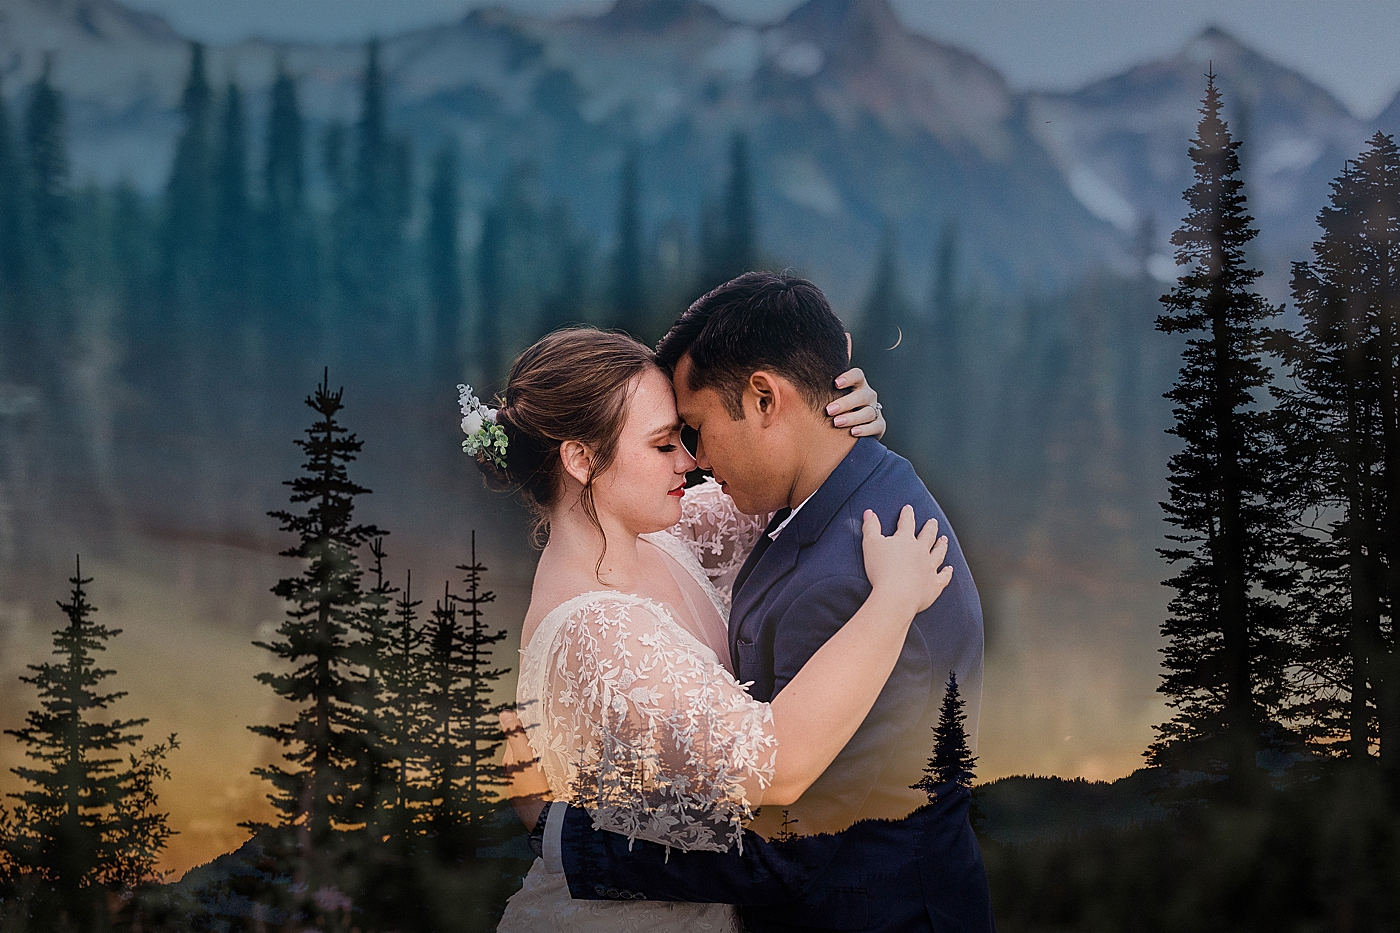 Double exposure of sunset photo and newly married couple at Mt Rainier. Photo by Megan Montalvo Photography.